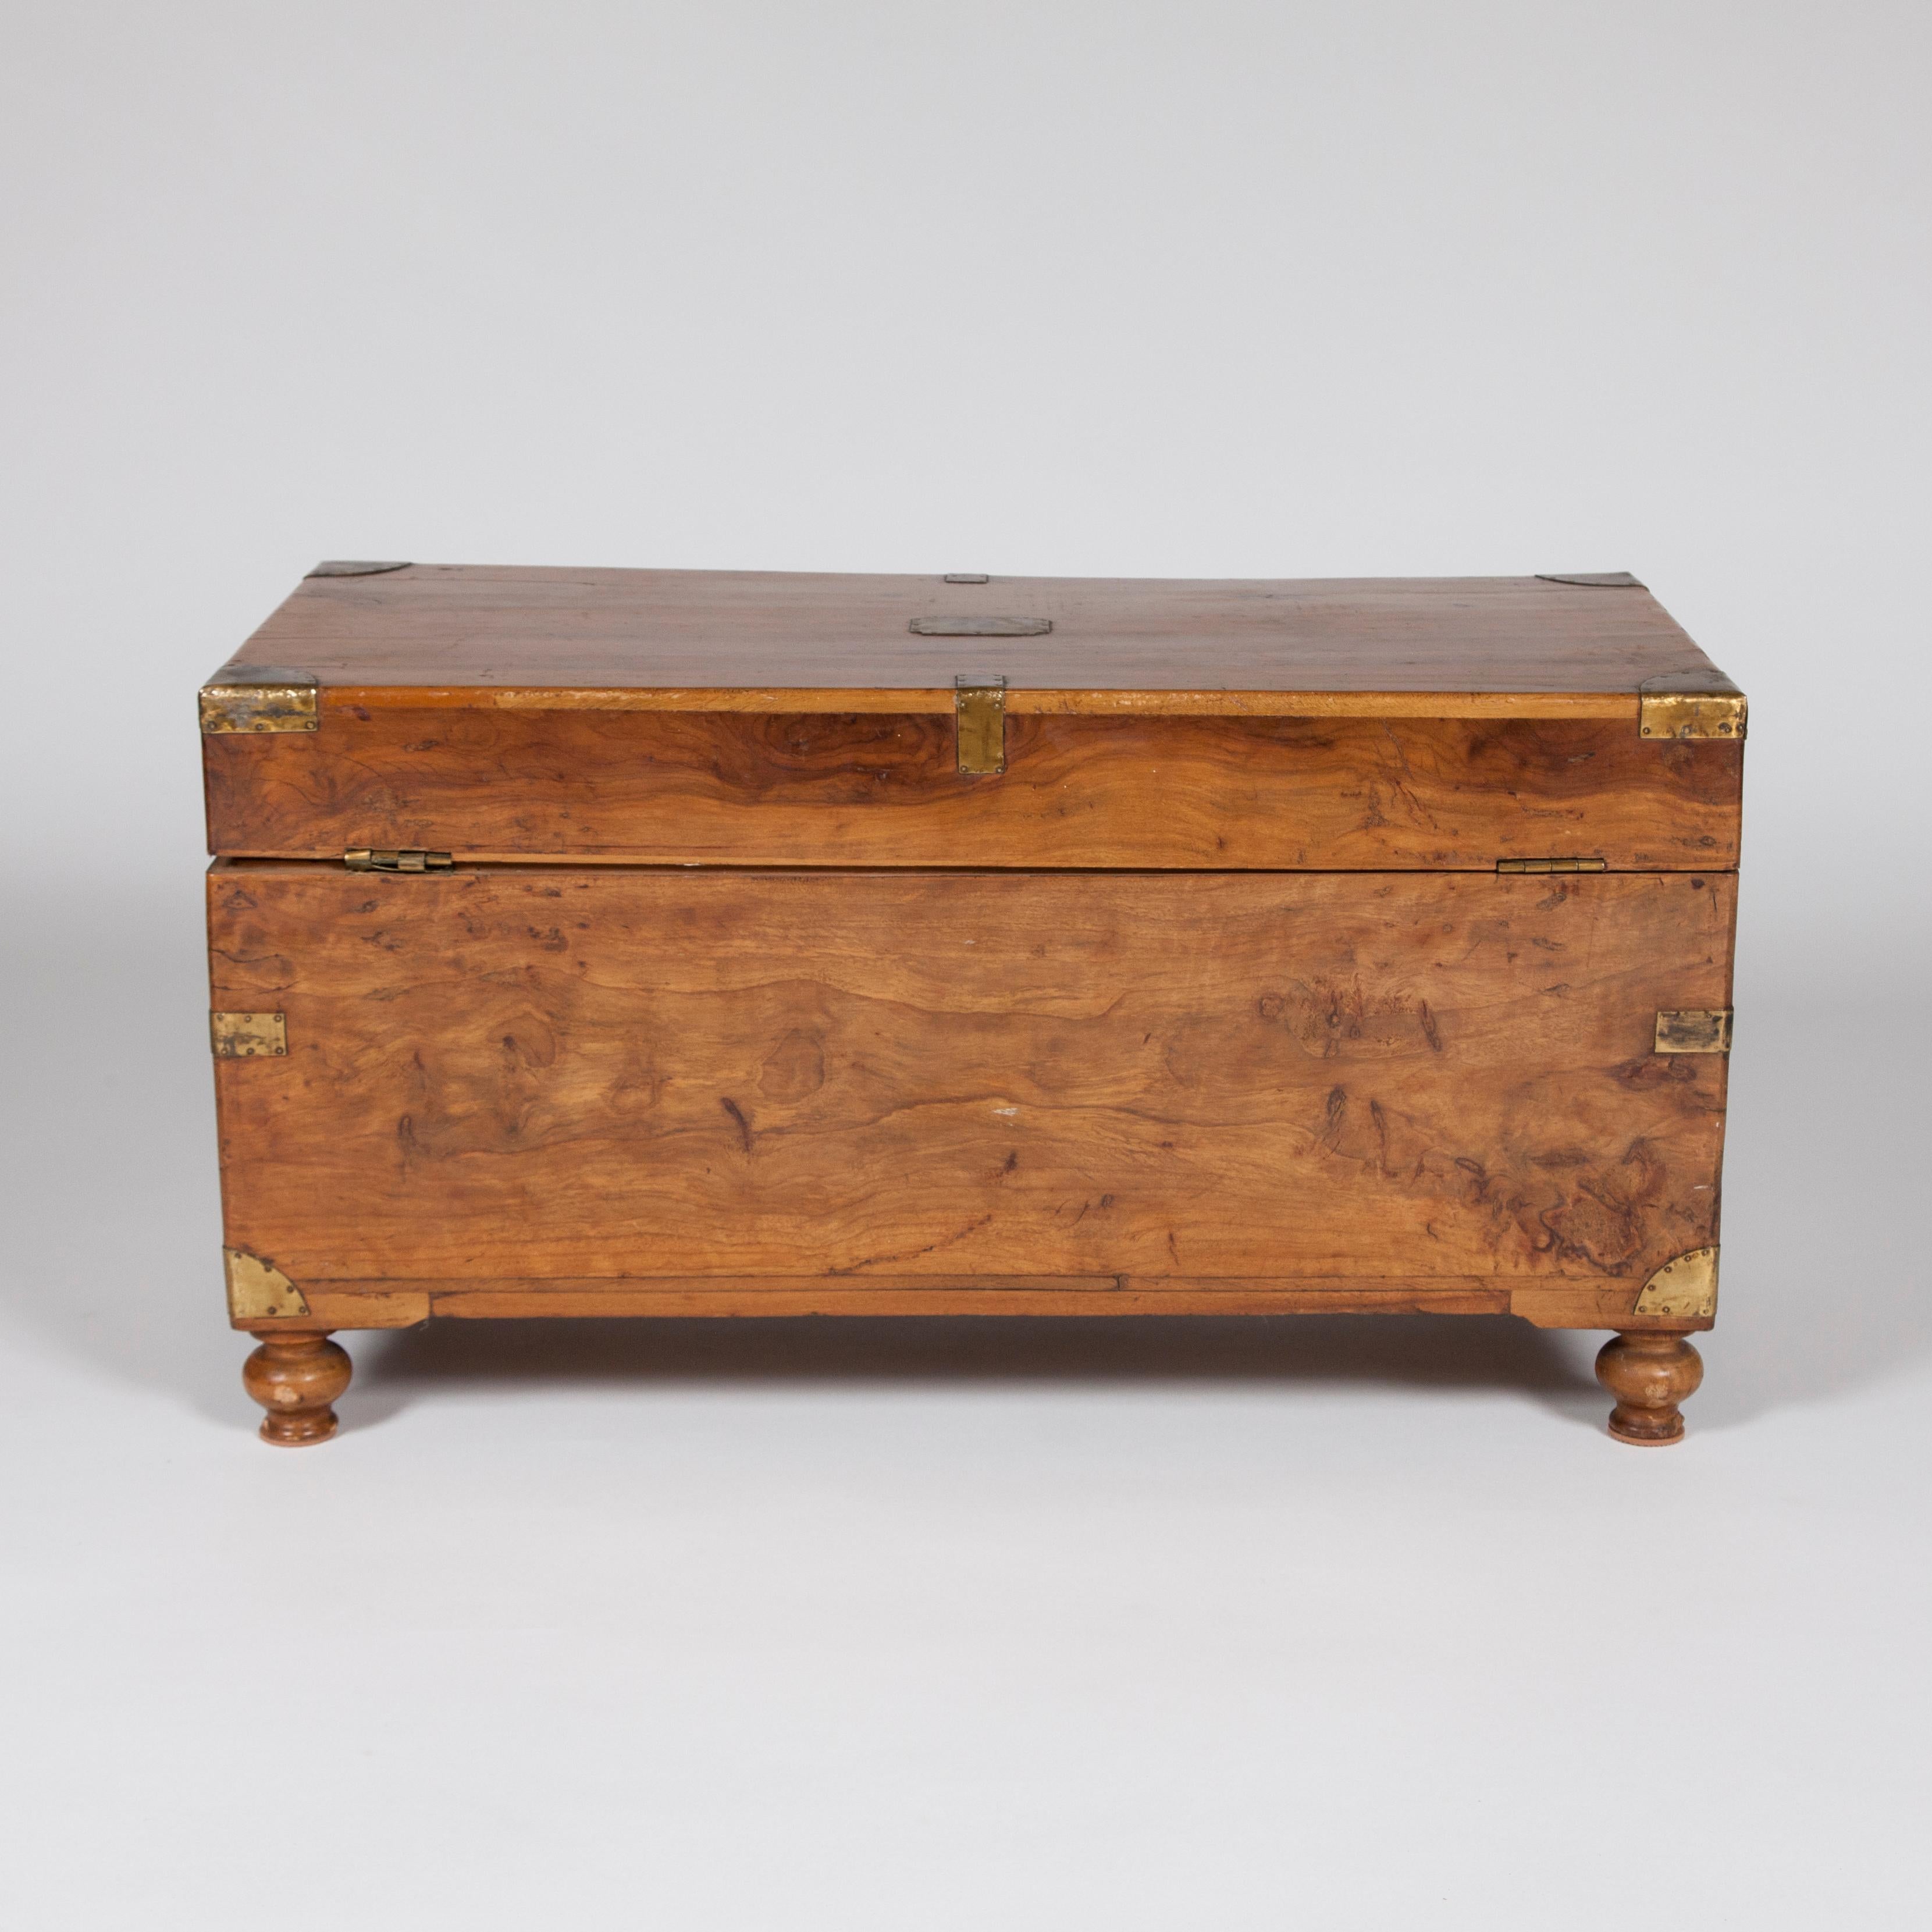 English Camphor Wood Trunk with Hinged Lid, Brass Handles and Mounts, on Turned Feet